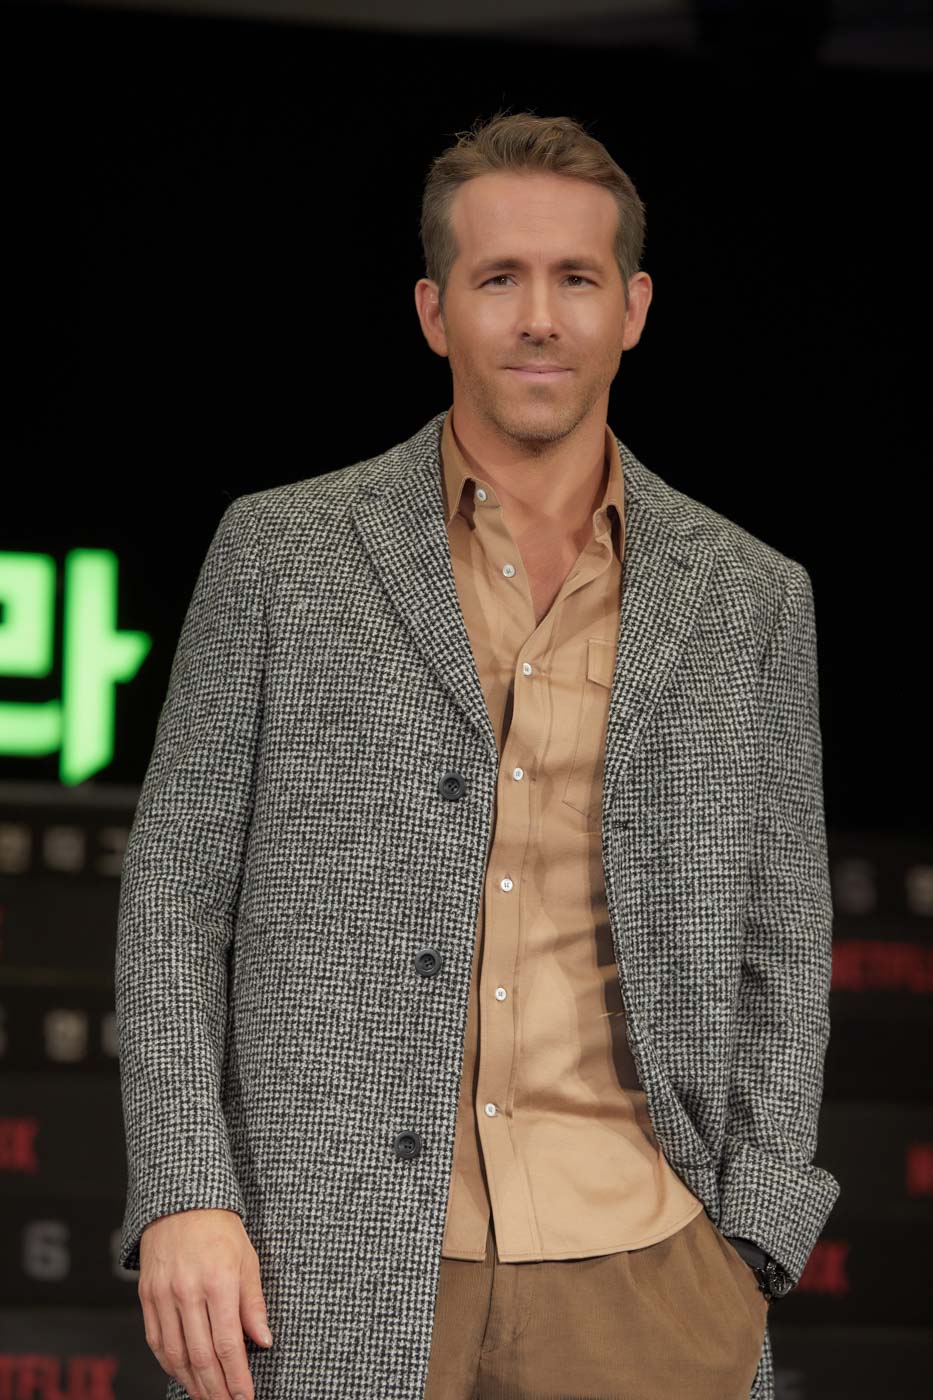 Leader of the band: Ryan Reynolds attends the press conference for the world premiere of Netflix's '6 Underground' at Four Seasons Hotel on December 02, 2019 in Seoul, South Korea. Photo courtesy of Netflix 